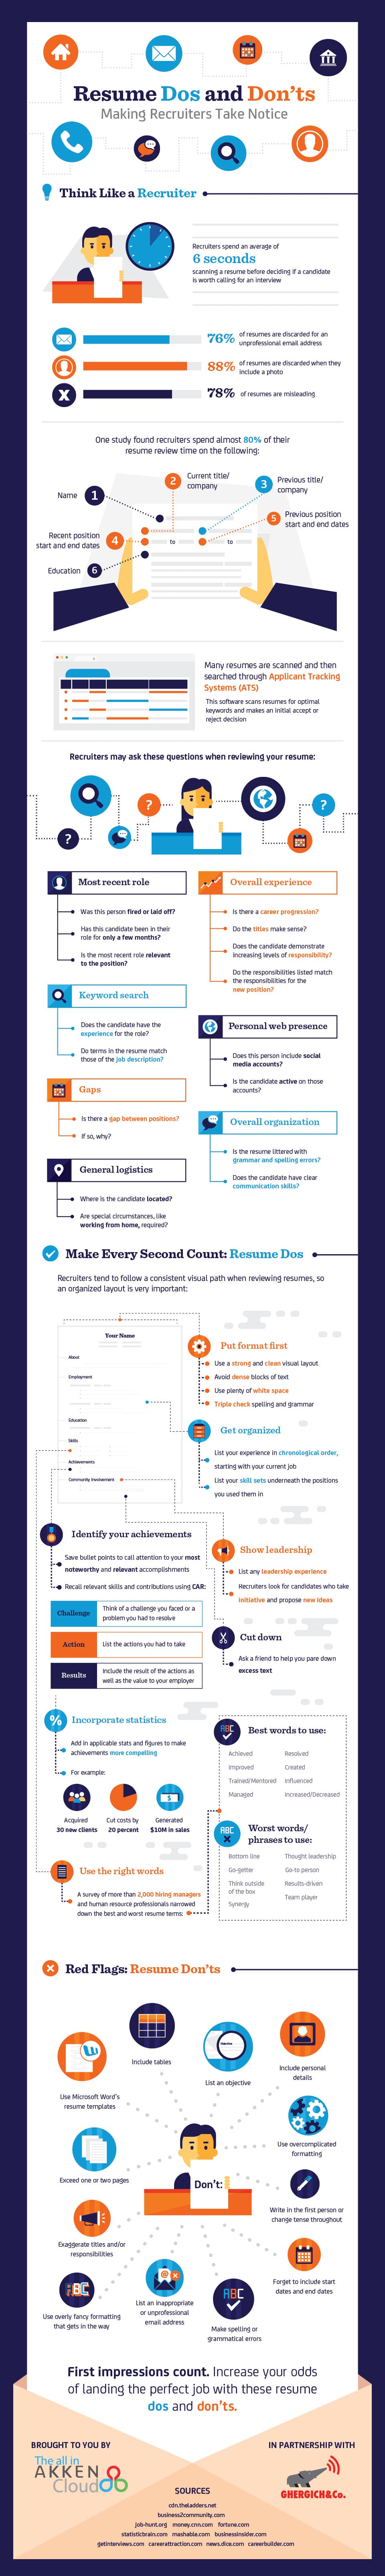 Do and donts on a resume